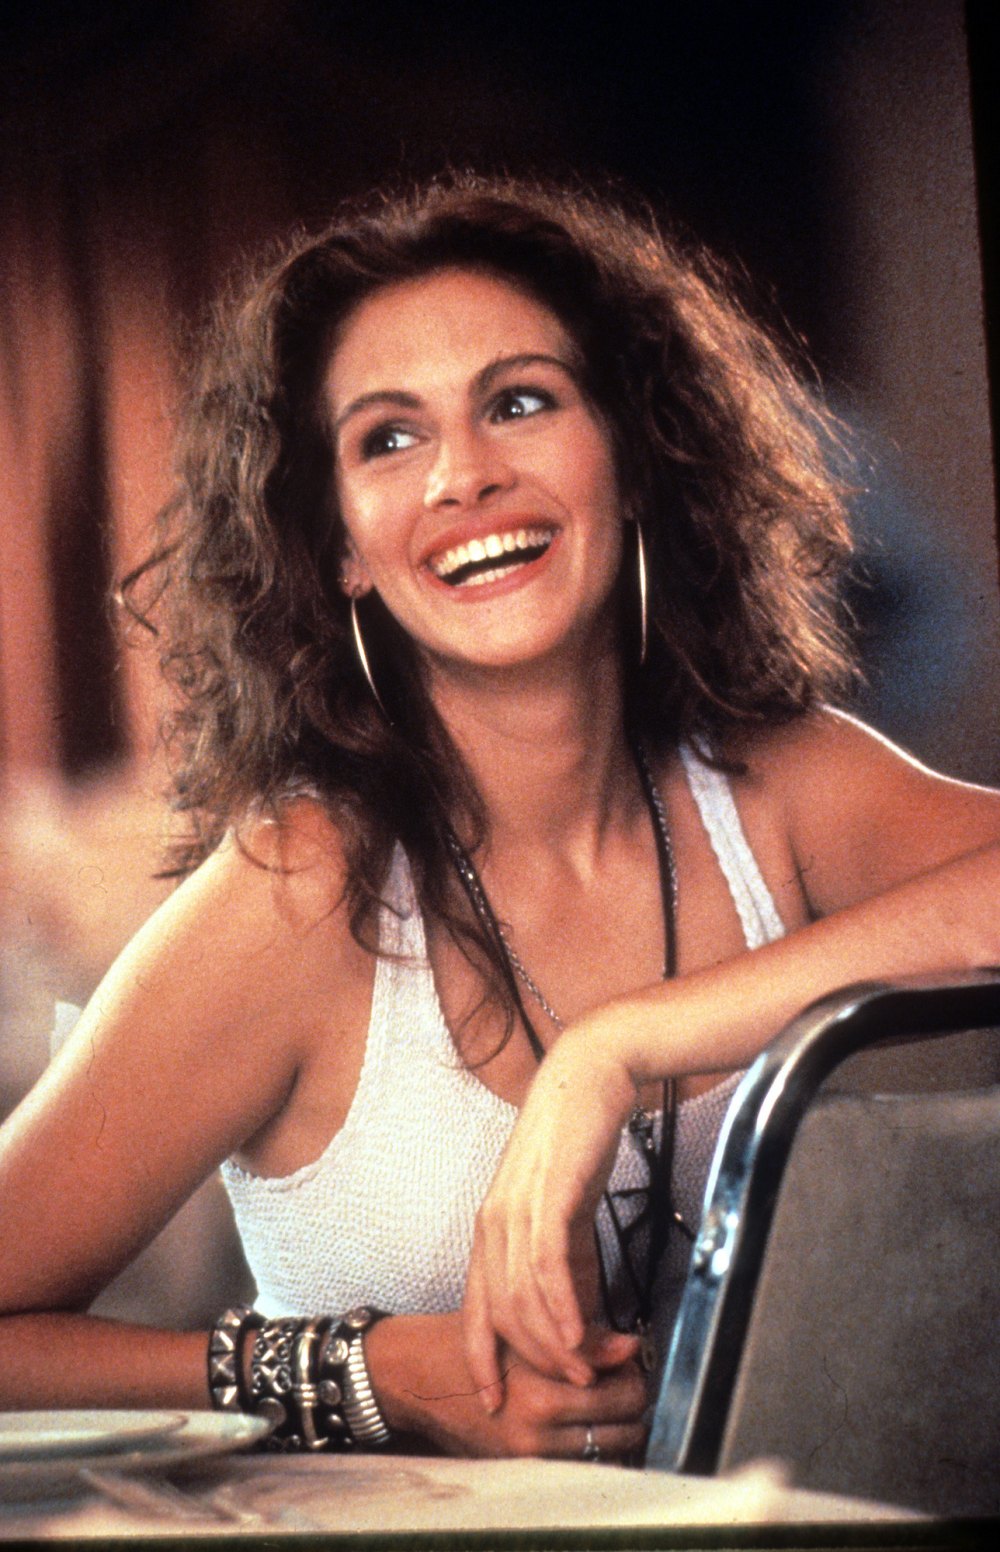 10 Pretty Woman Behind-The-Scenes Facts You Might Not Know About The Julia  Roberts Movie